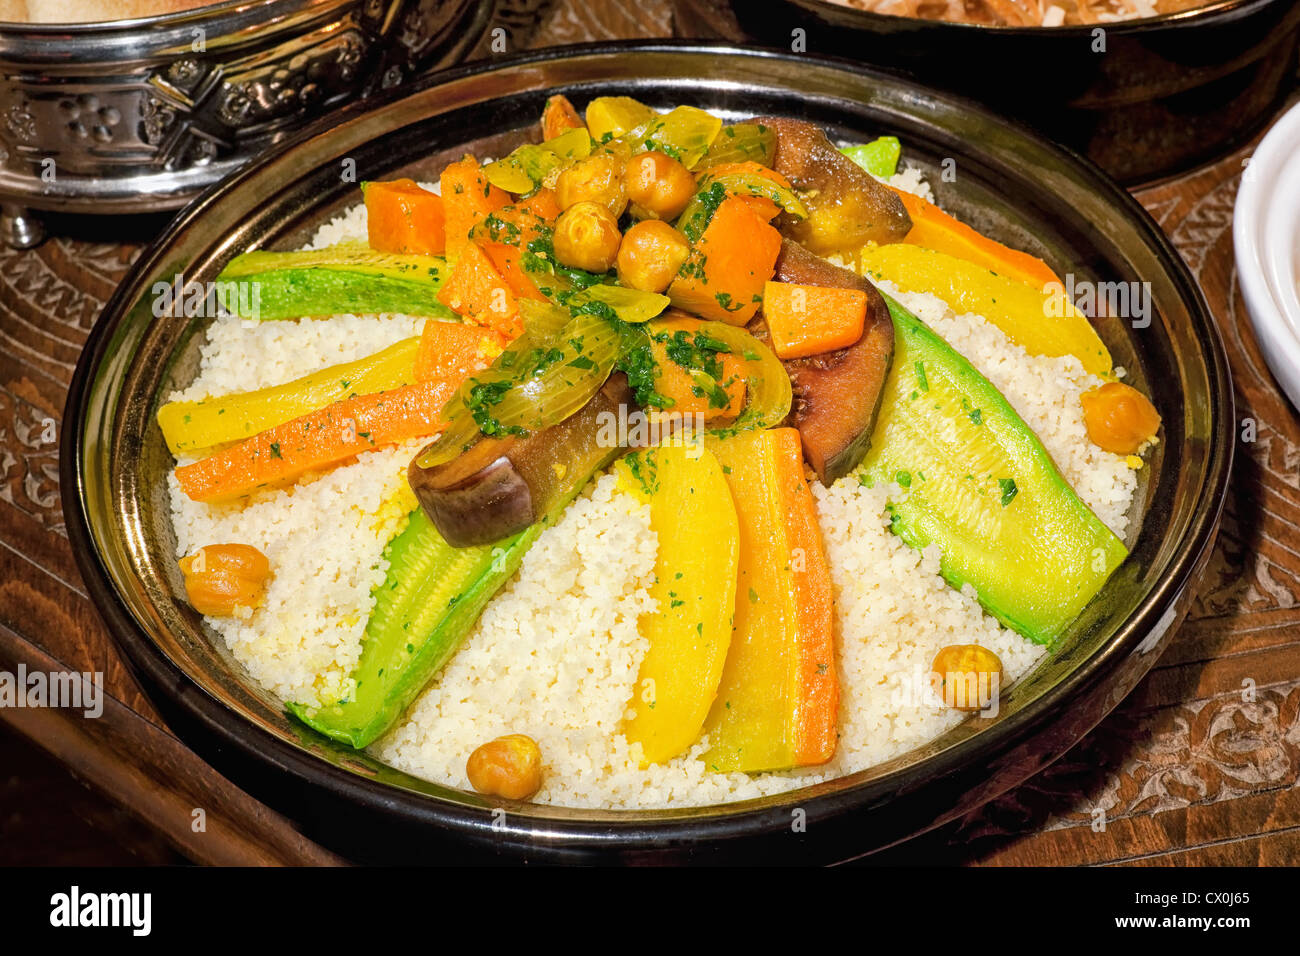 Moroccan couscous meal. Stock Photo